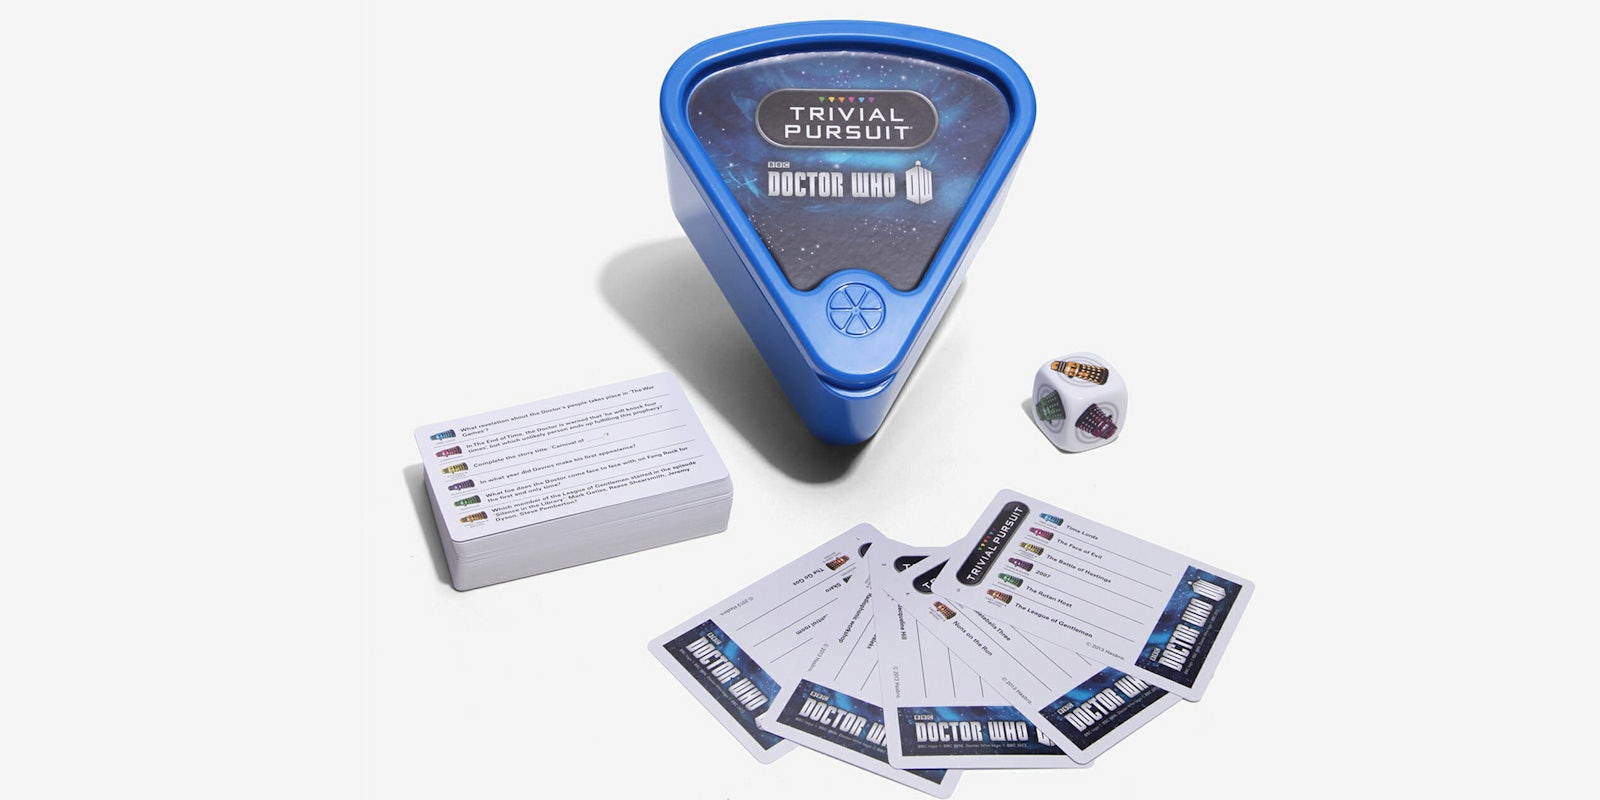 doctor who trivial pursuit